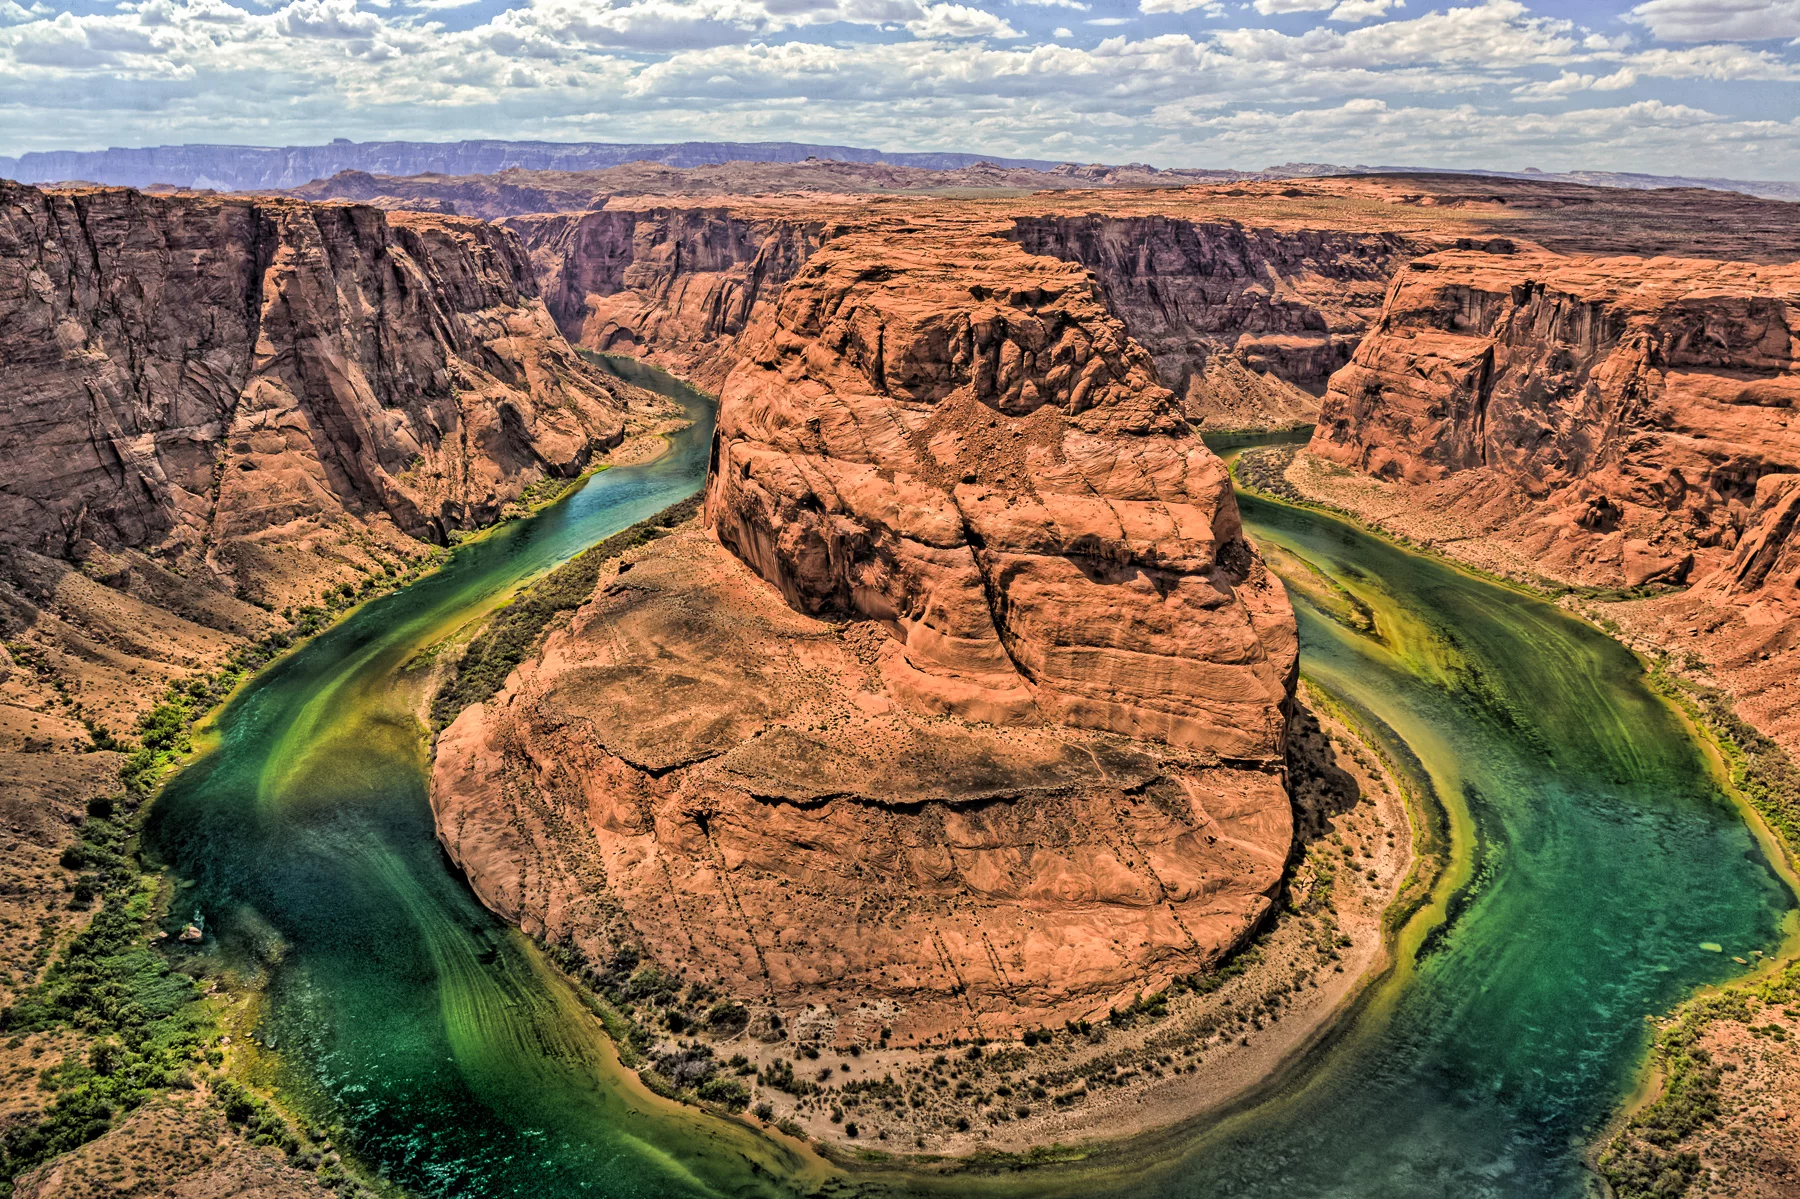 Horseshoe Bend In Hdr Usa.webp?h=1400&q=83